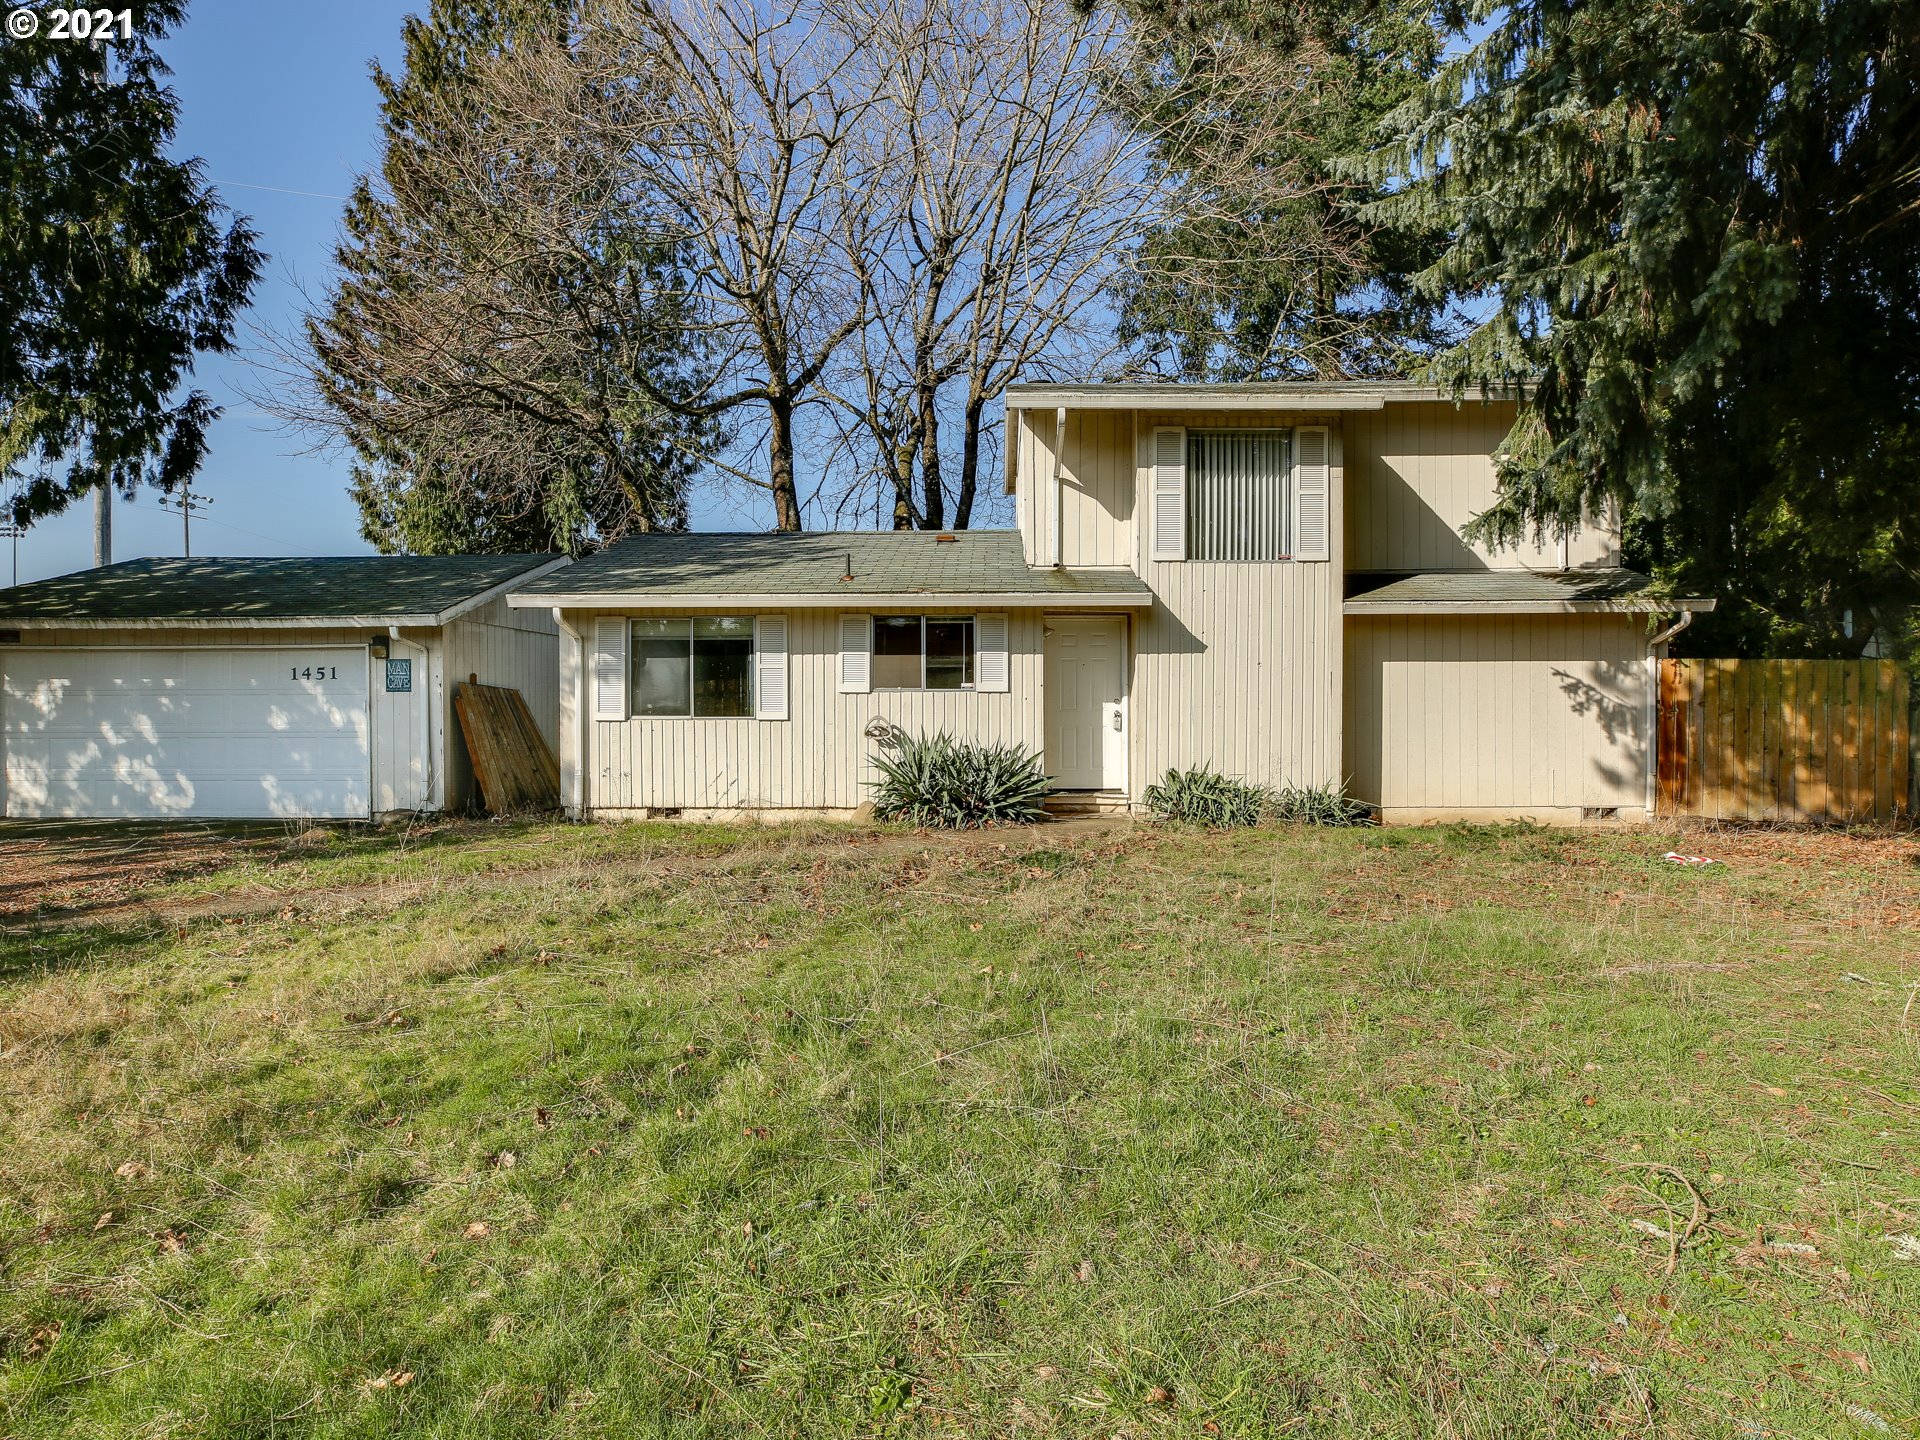 1451 SE 135TH AVE (1 of 31)